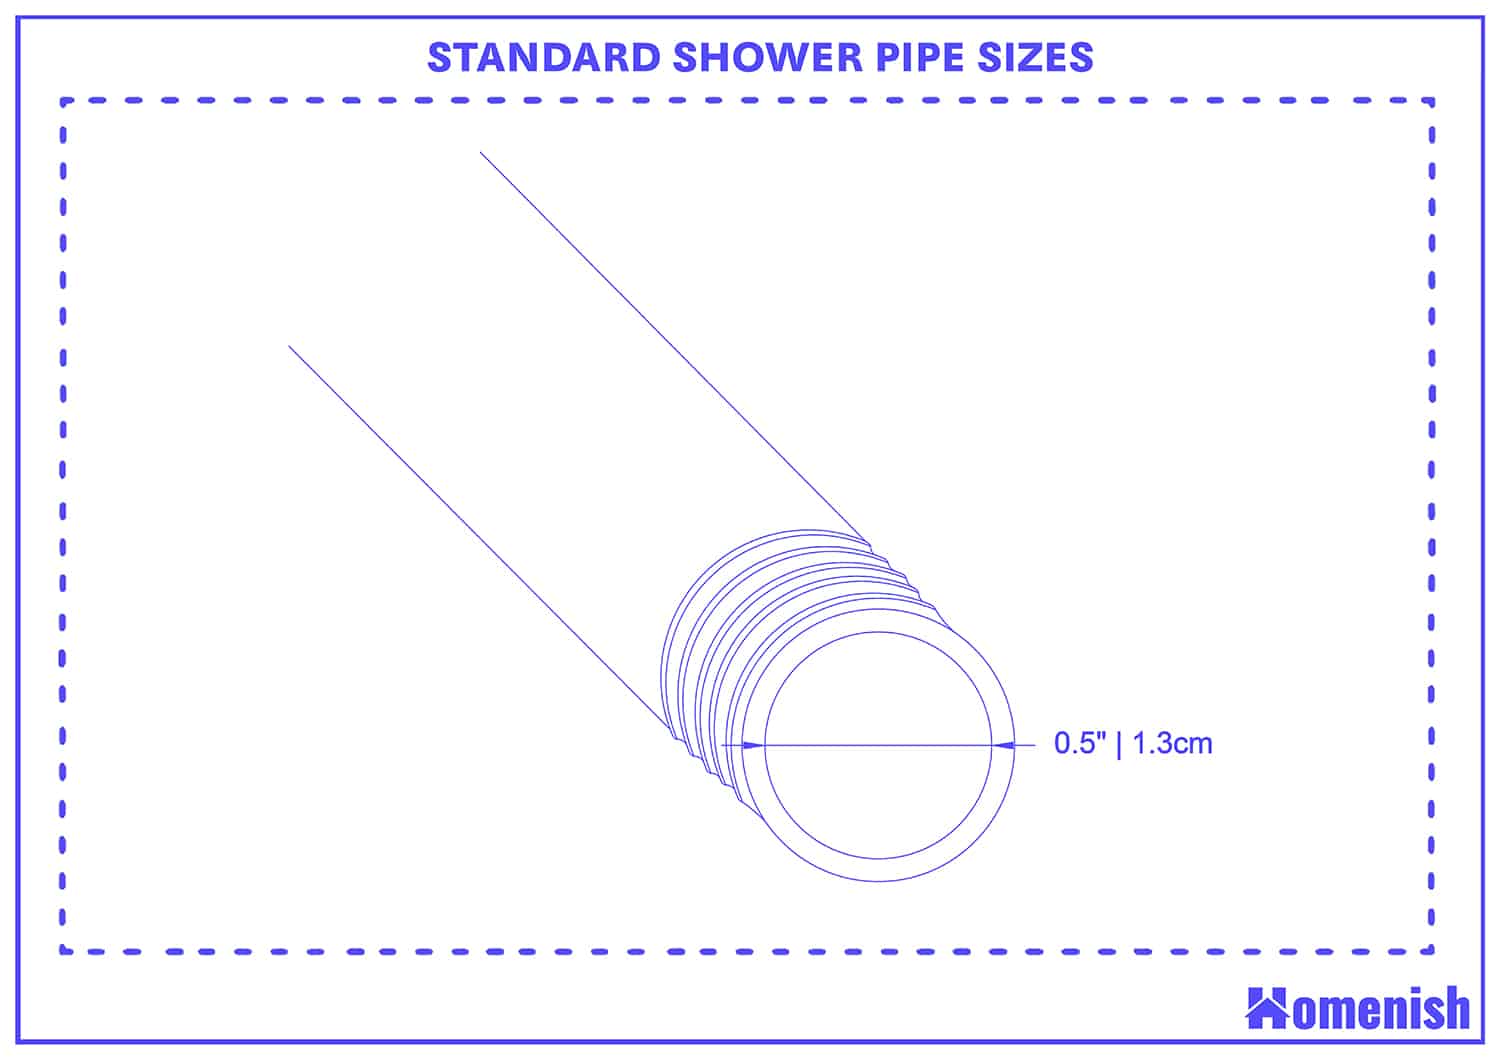 Standard shower pipe sizes